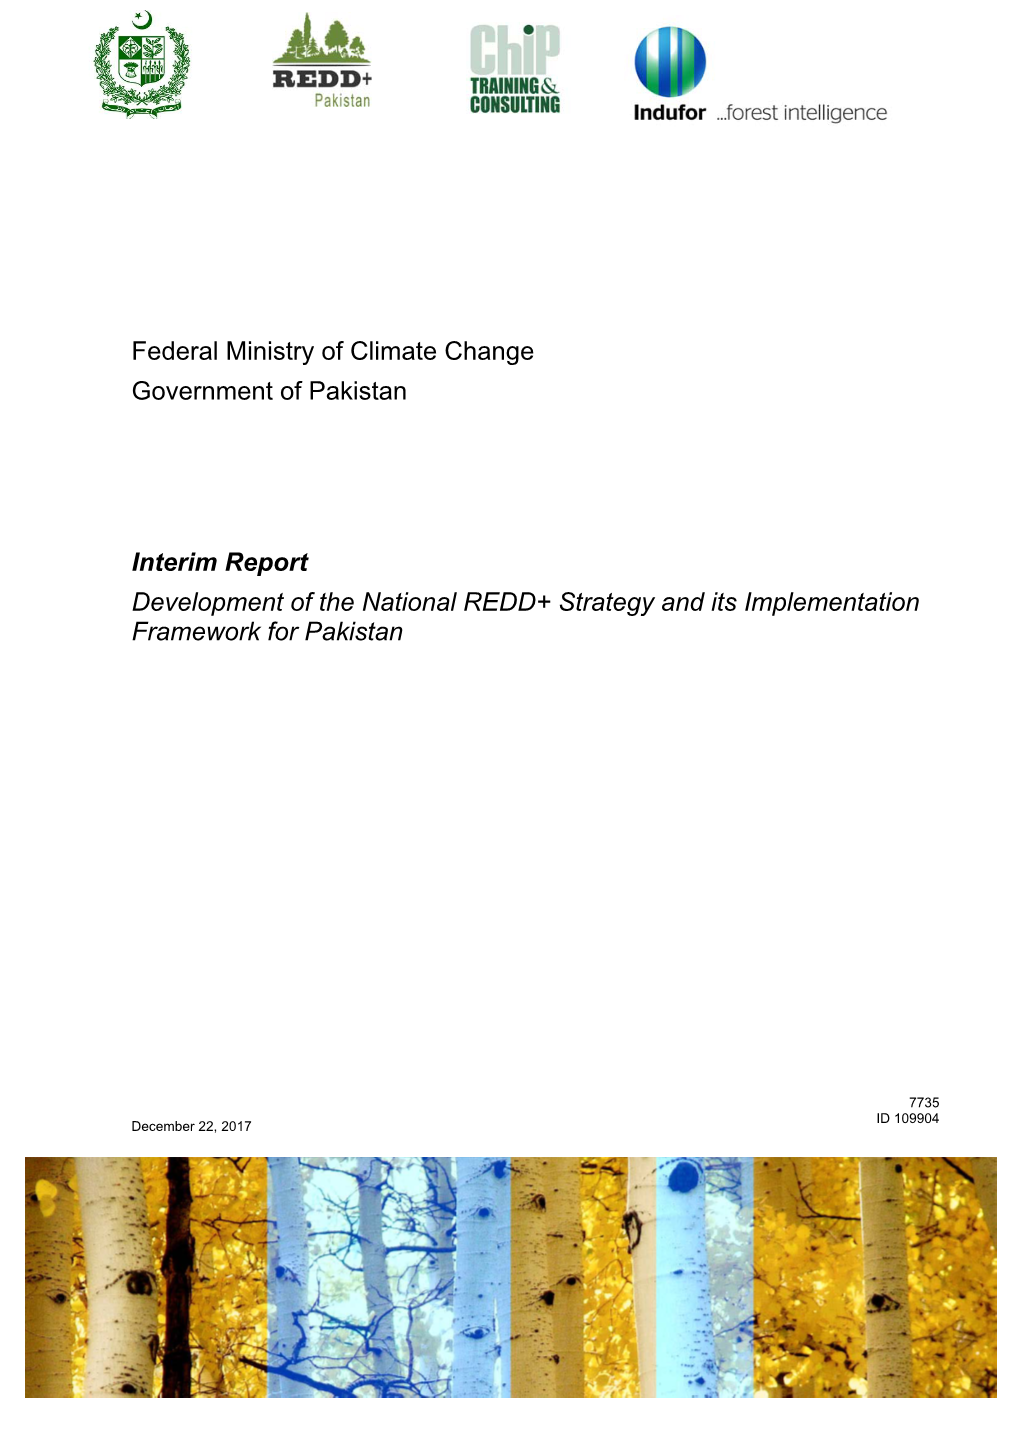 Federal Ministry of Climate Change Government of Pakistan Interim